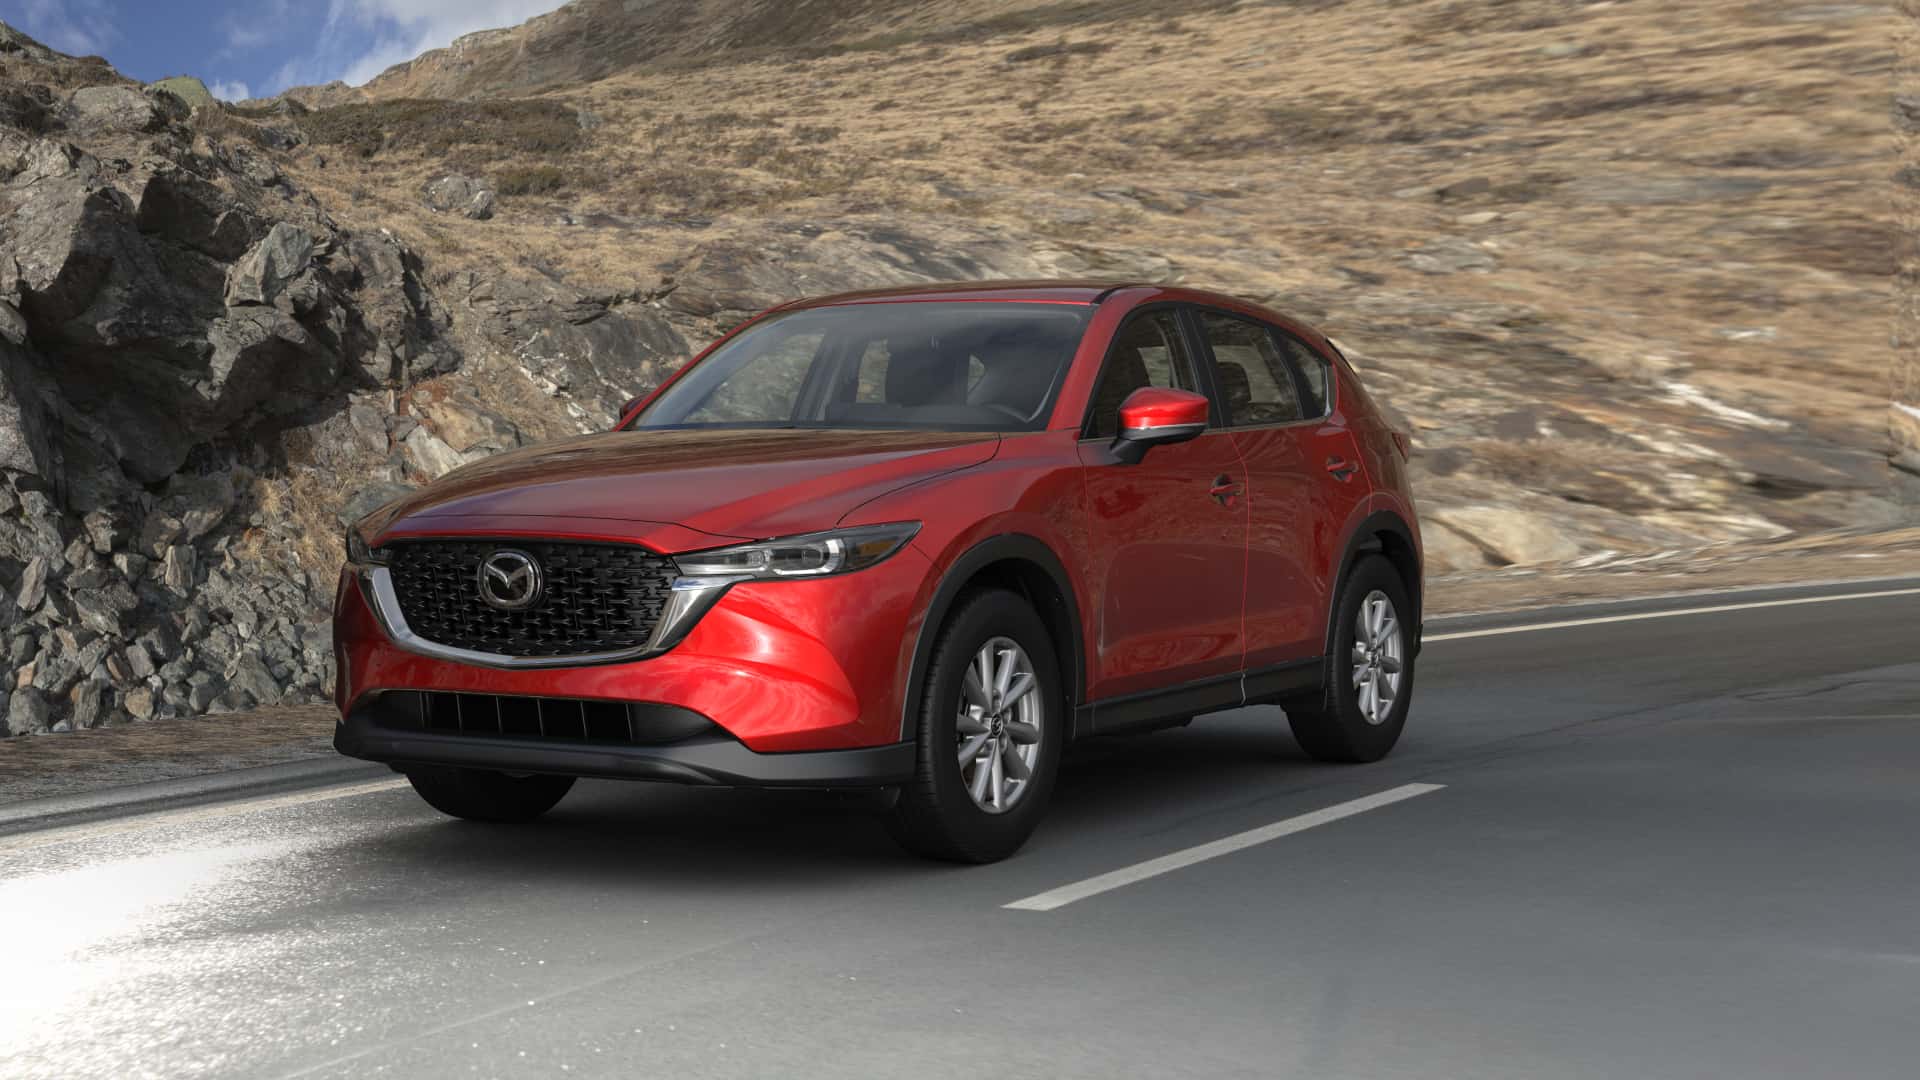 2023 Mazda CX-5 2.5 S Soul Red Crystal Metallic | Russell & Smith Mazda in Houston TX